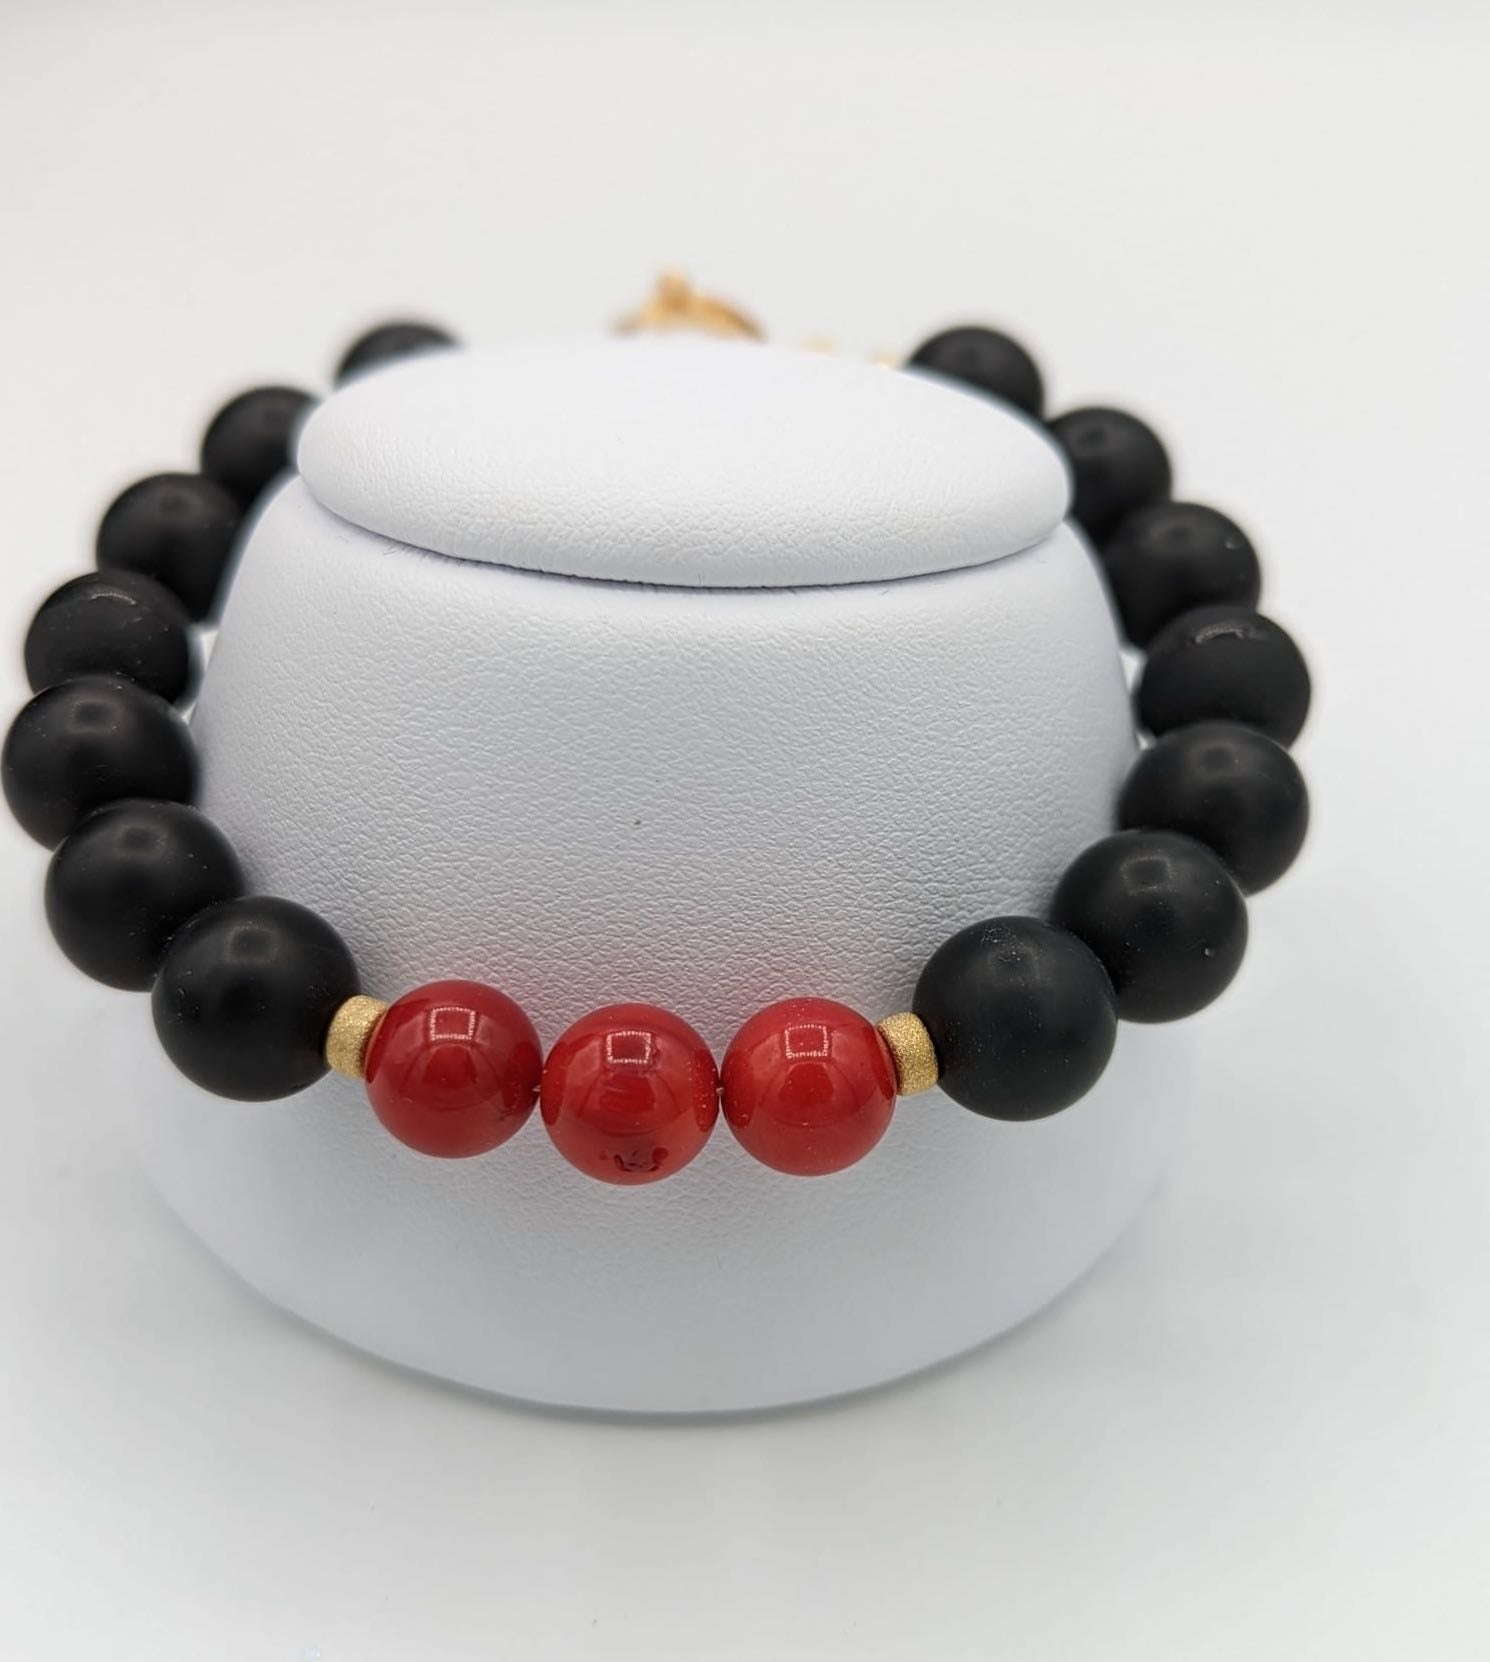 14K Gold-filled Handcrafted Black Onyx and Red Coral Bracelet